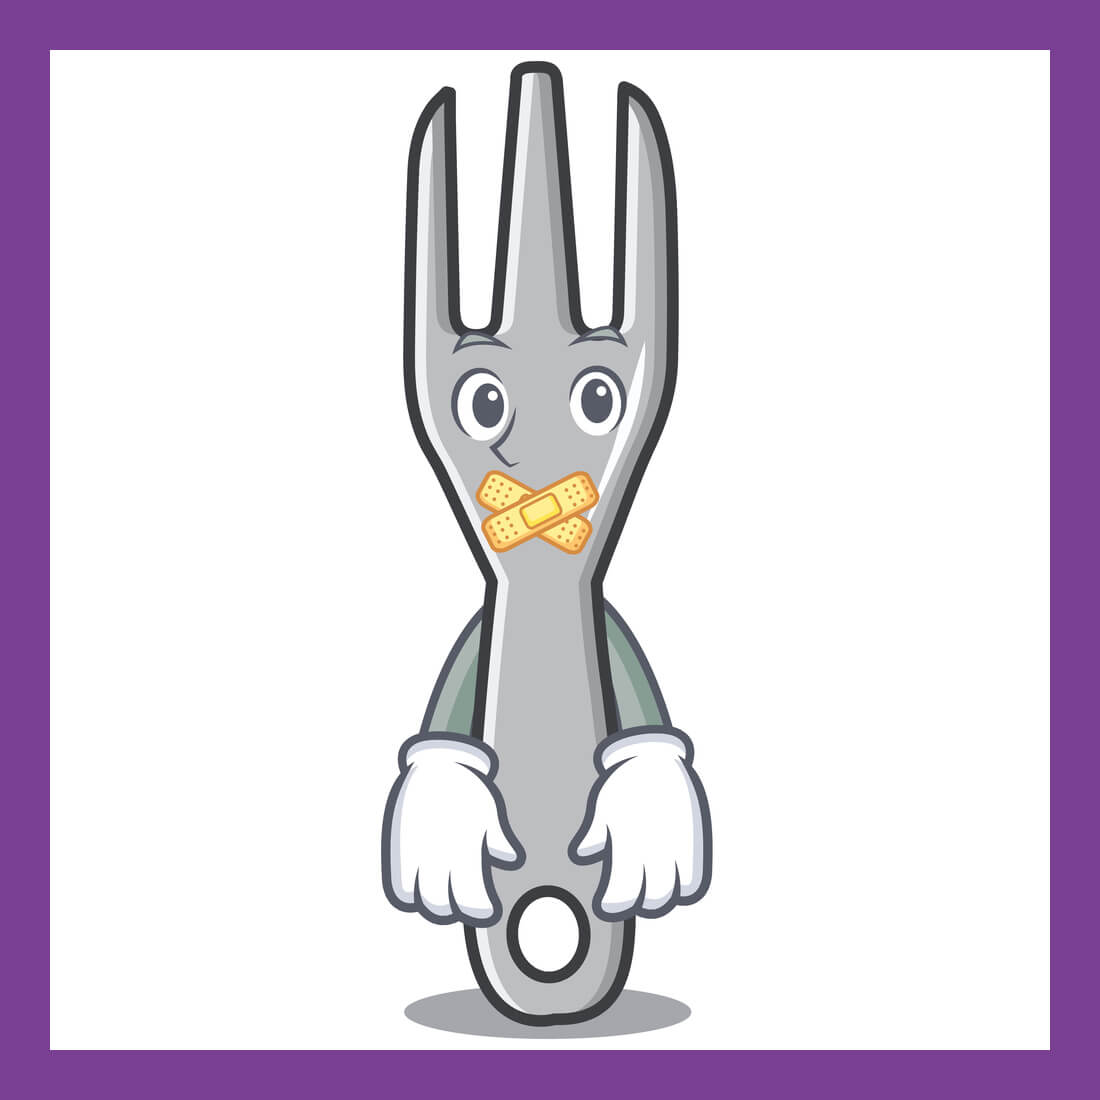 Cartoon character fork with big eyes and band aids covering mouth for silence